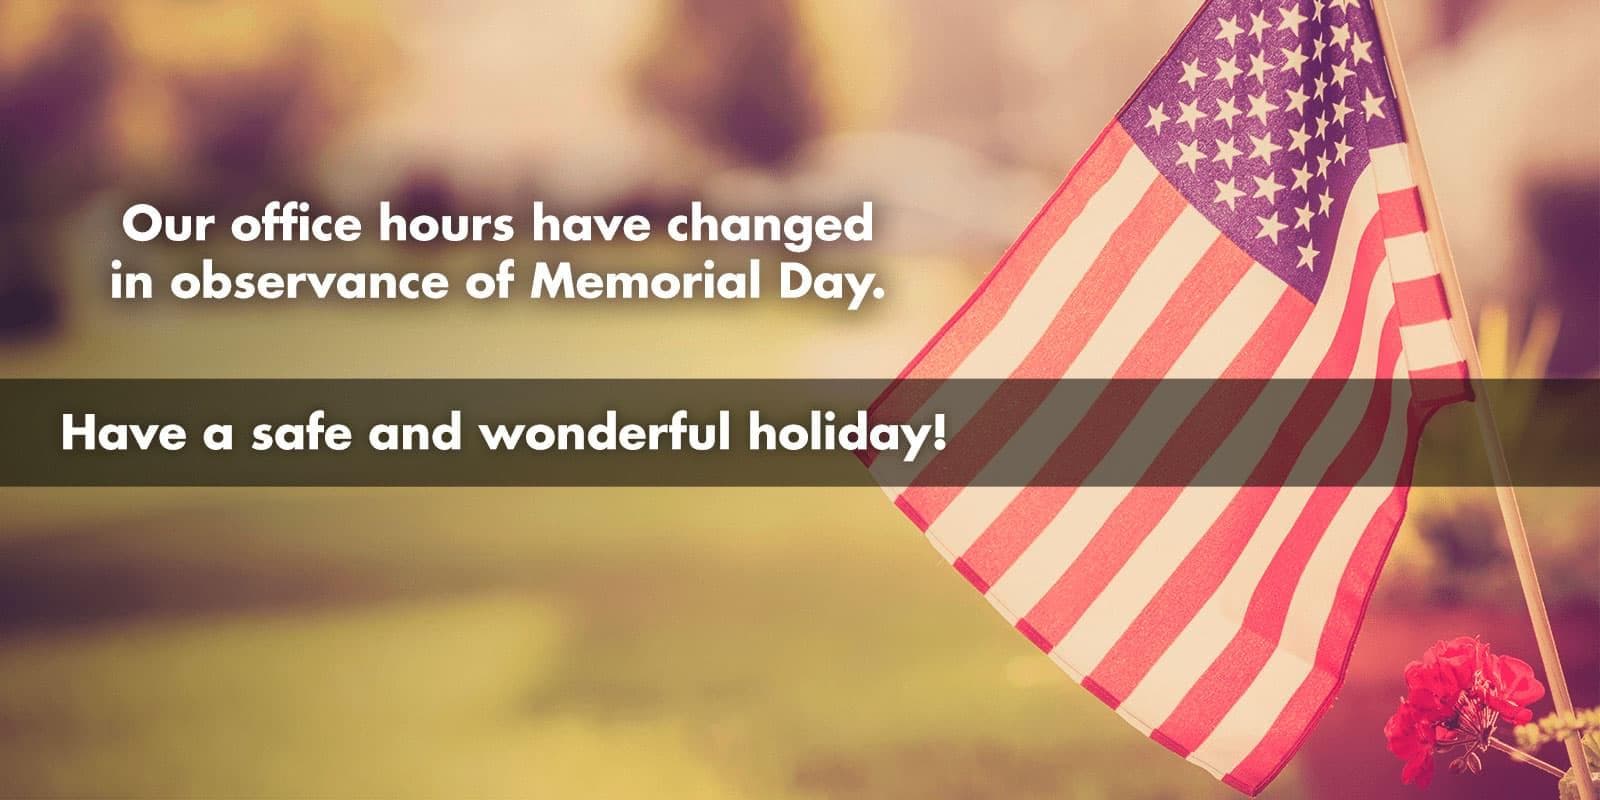 Our office hours have changed for Memorial Day